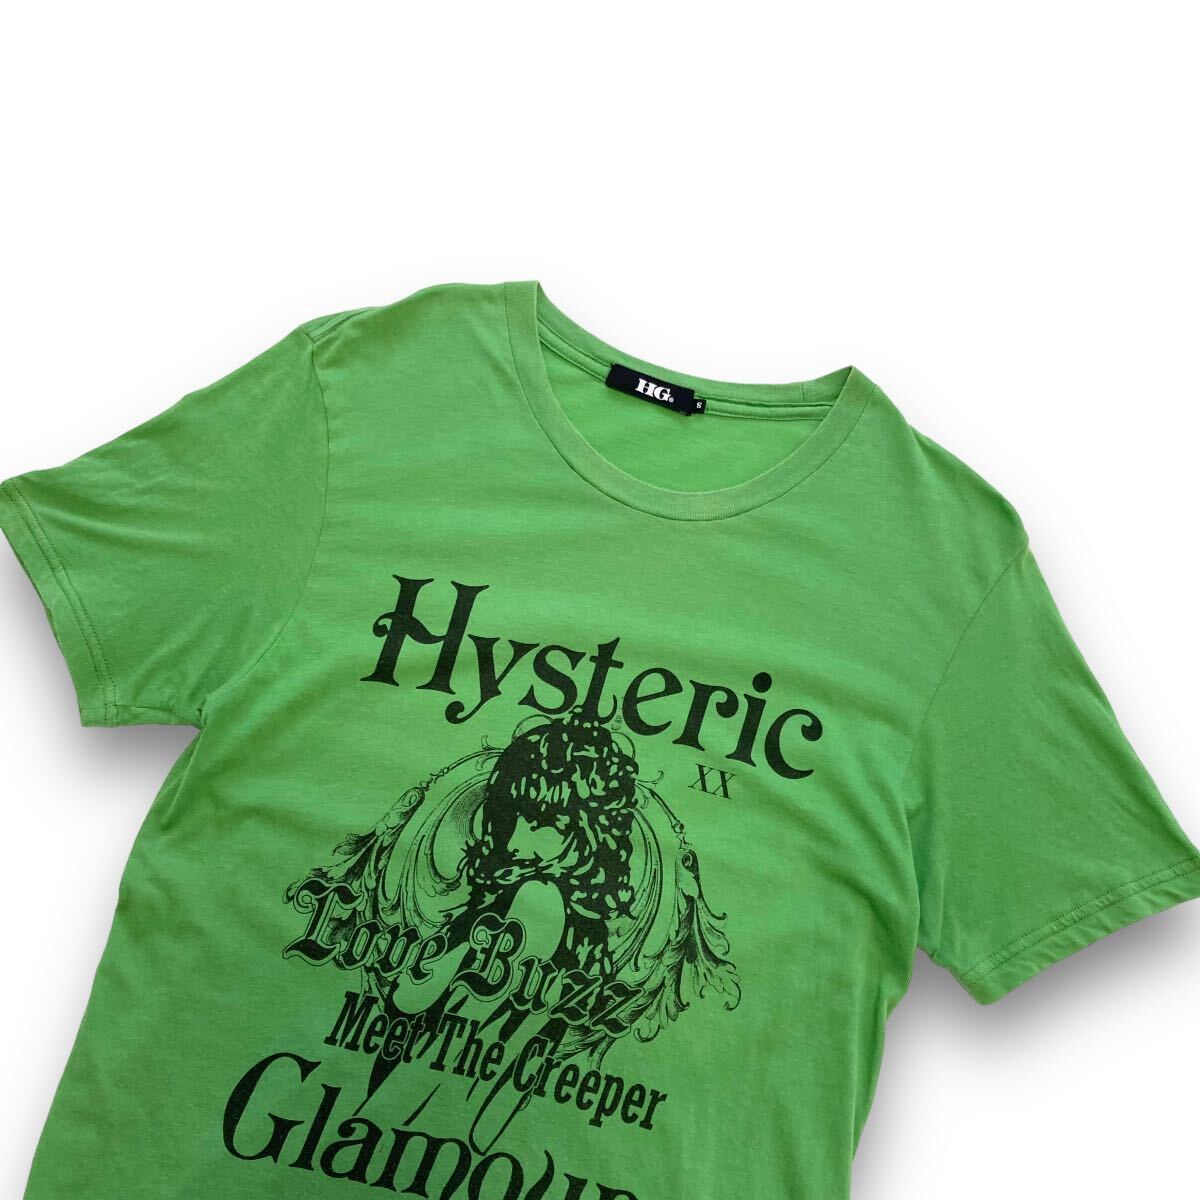 【HYSTERIC GLAMOUR】ヒステリックグラマー ヒスガール tシャツ 半袖Tシャツ Love Buzz Meet The Ceeper 日本製 グリーン カットソー 